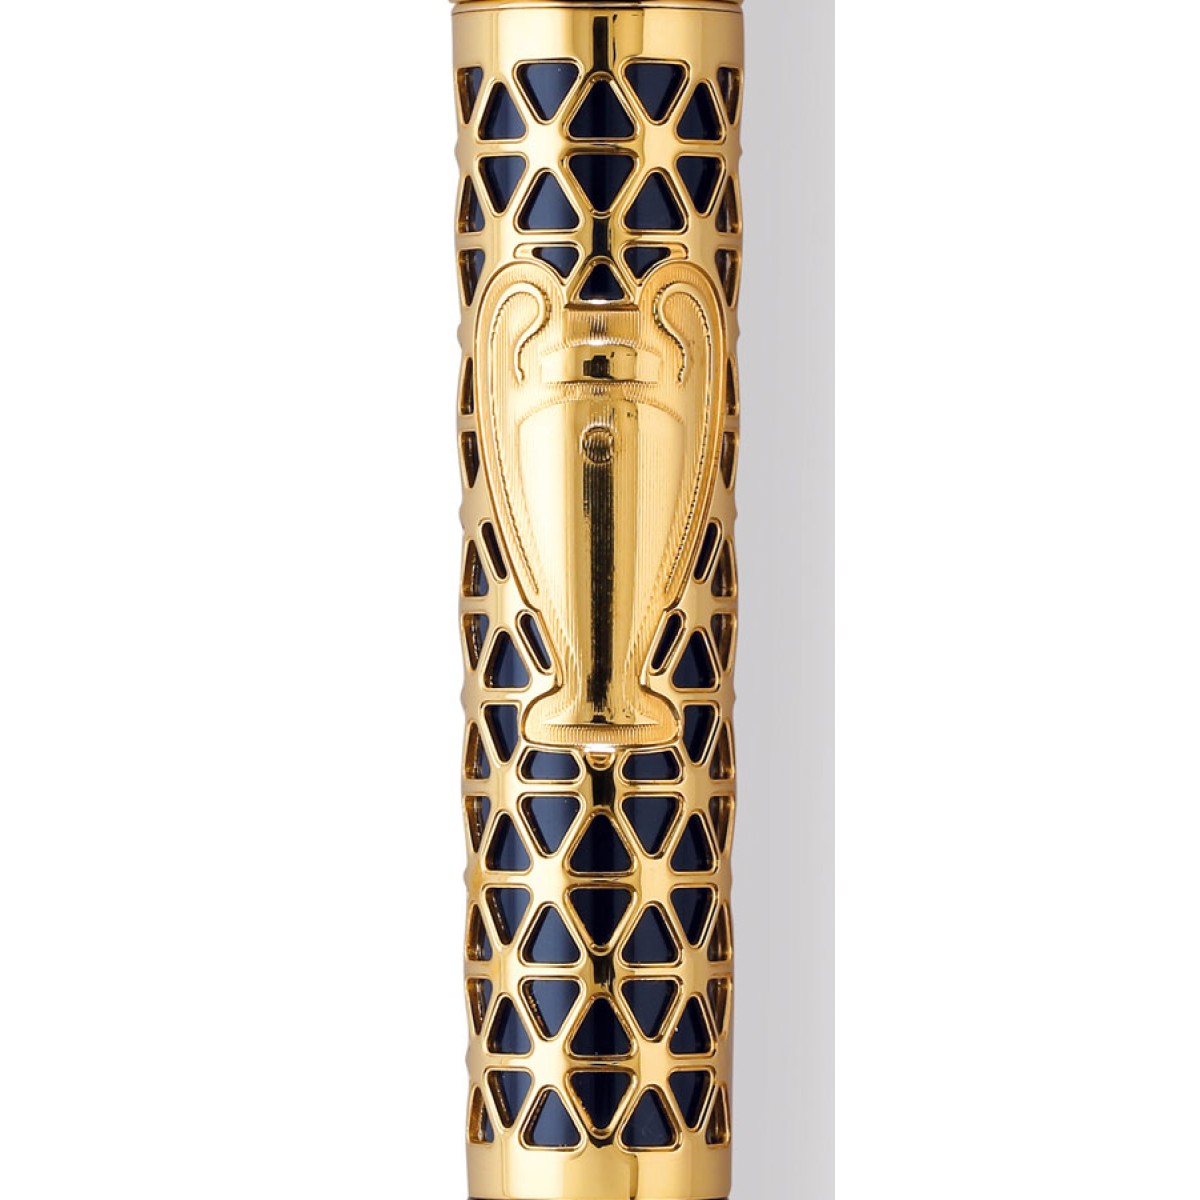 Montegrappa - Best Of The Best - Solid Gold 18kt. - Rollerball Pen